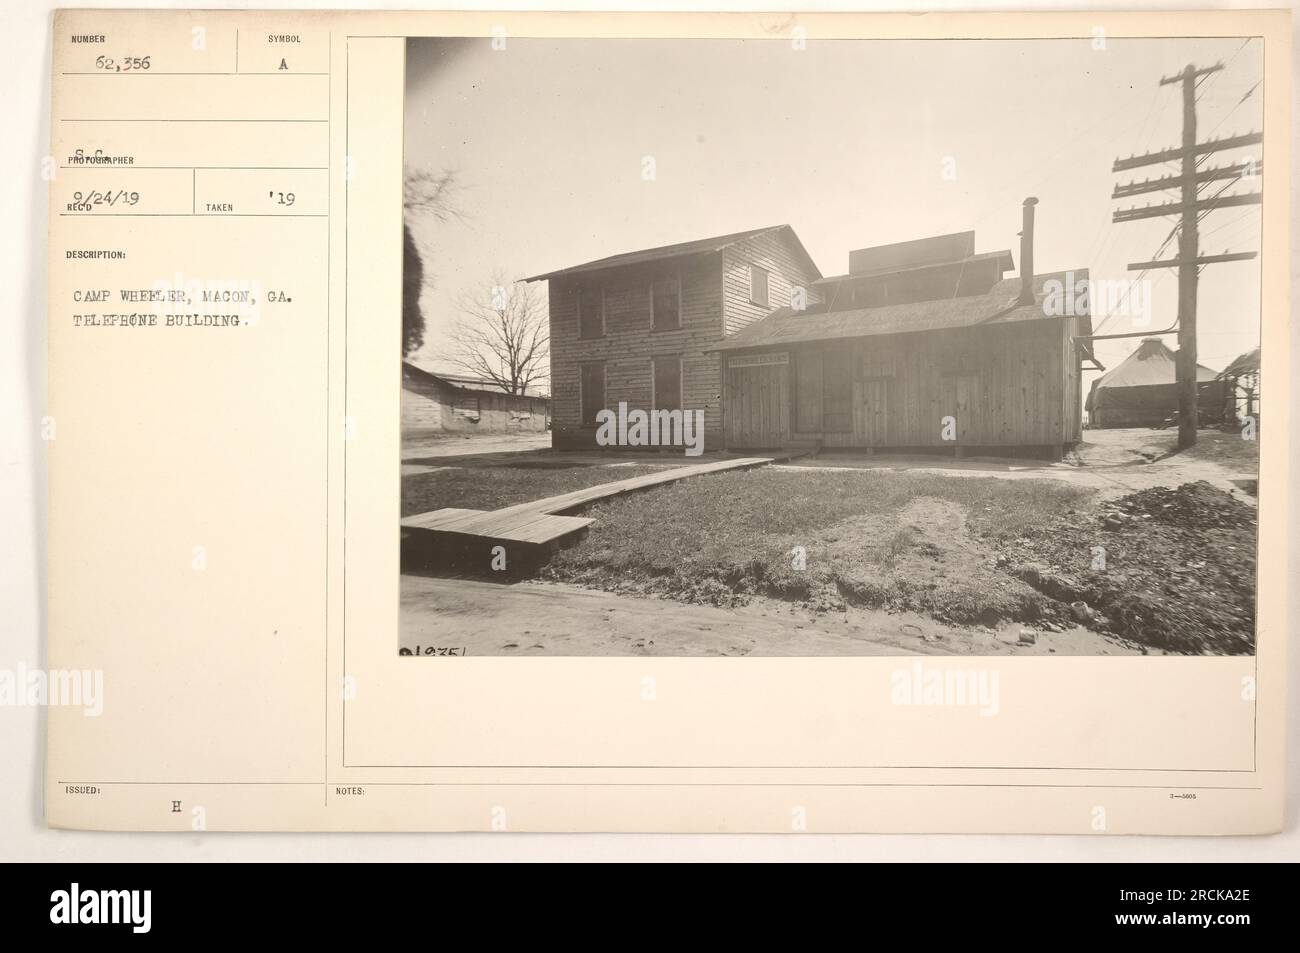 'Telephone Building at Camp Wheeler in Macon, Georgia. Photo taken in 1919. The building was assigned the numerical designation of 62,556, according to official records. The image shows a symbol 'H' on the building. Note: Information provided is descriptive and factual.' Stock Photo